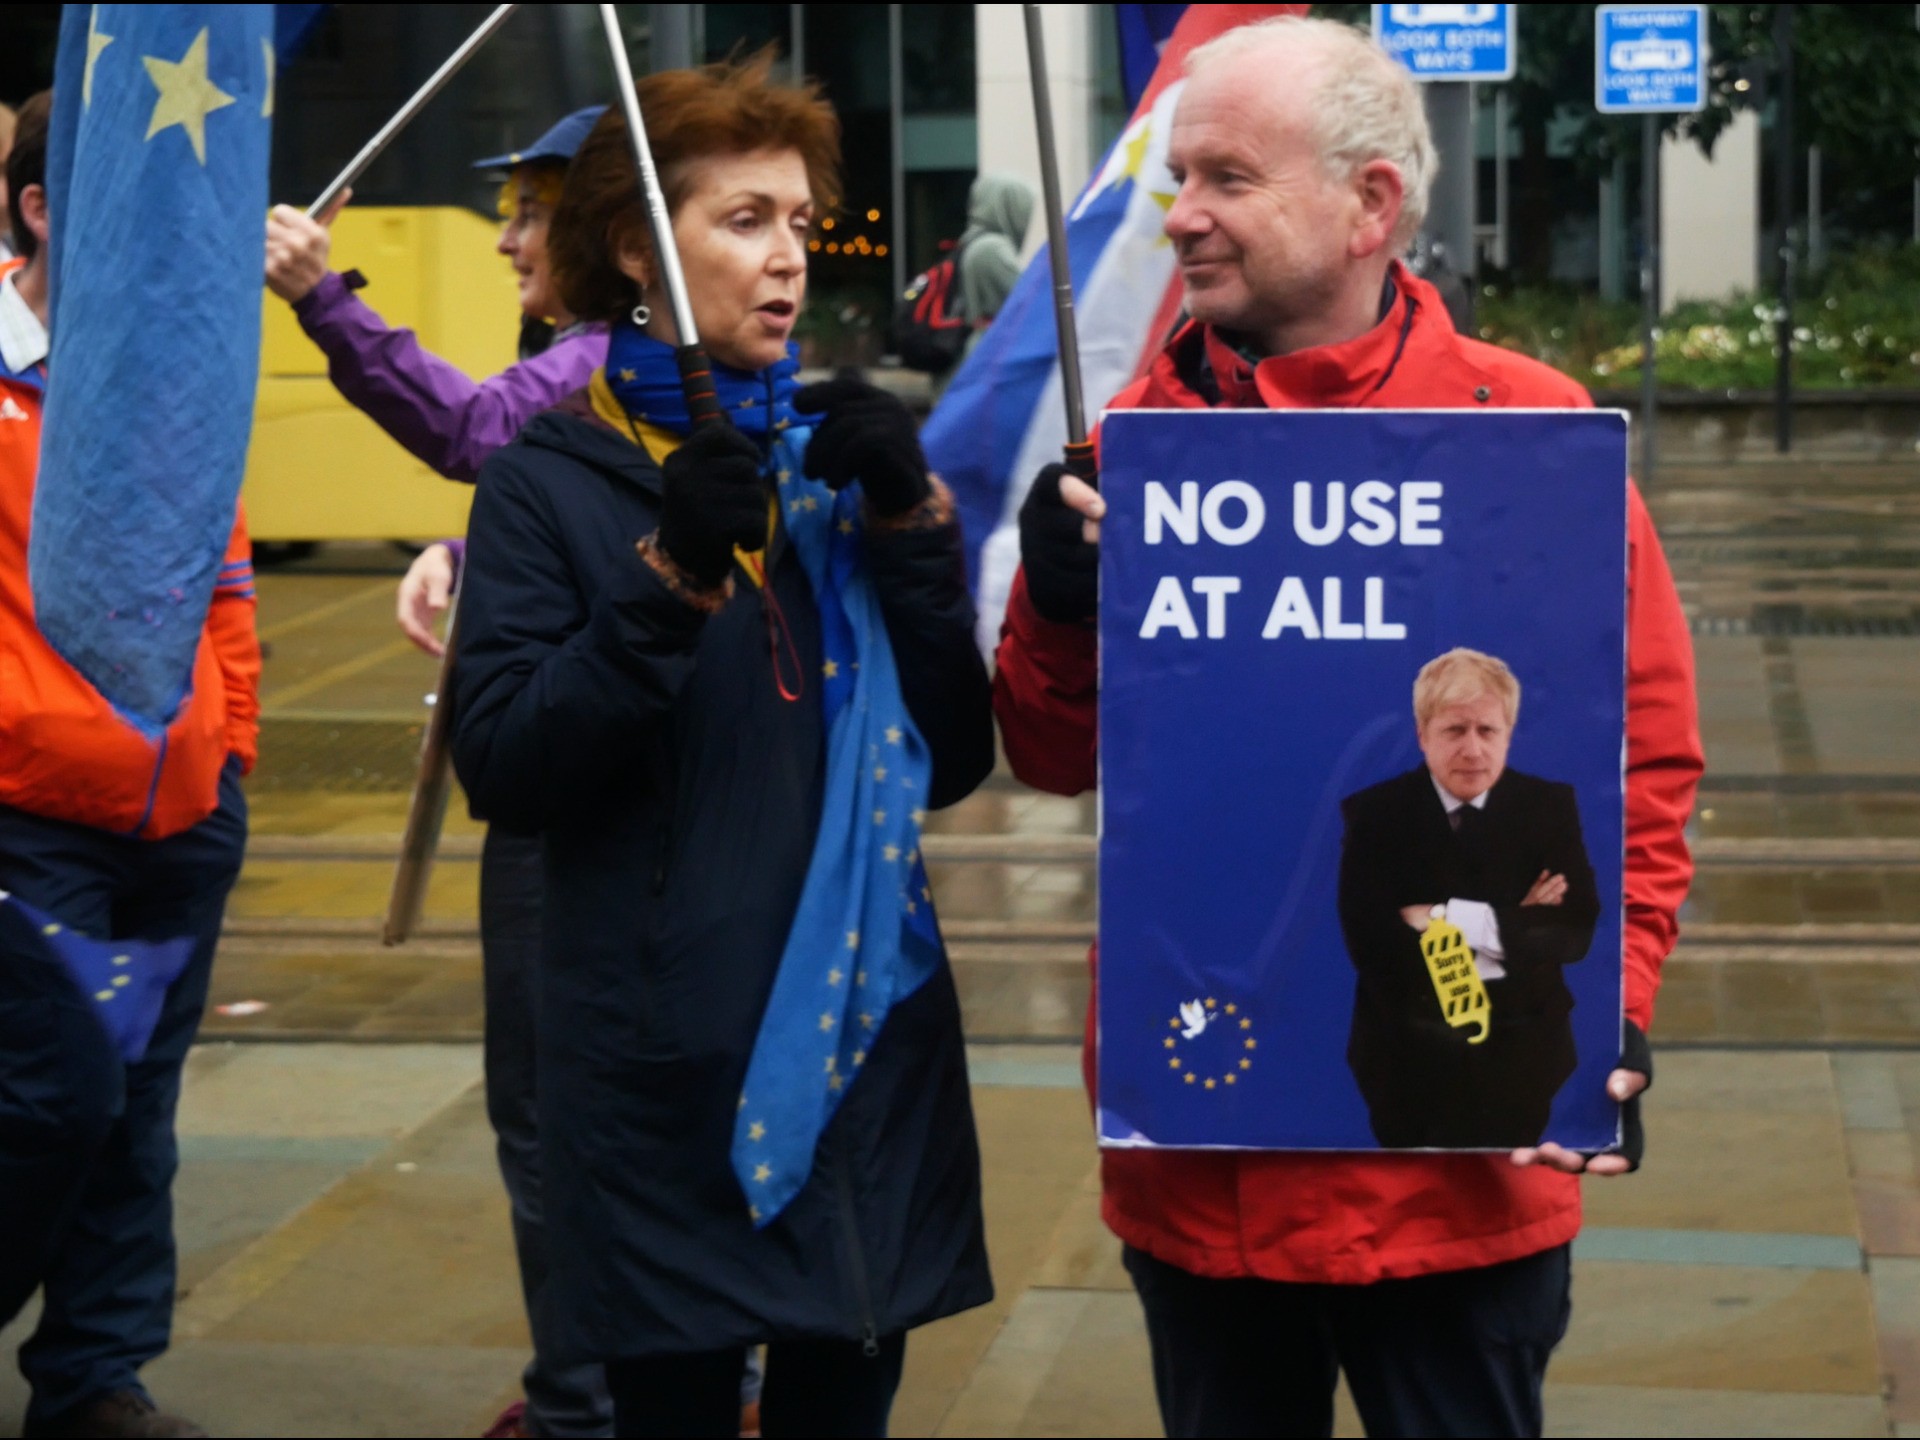 Anti-Brexit protest in Manchester, England ahead of the Conservative Party Conference. October 2, 2021. Kurt Zindulka, Breitbart News